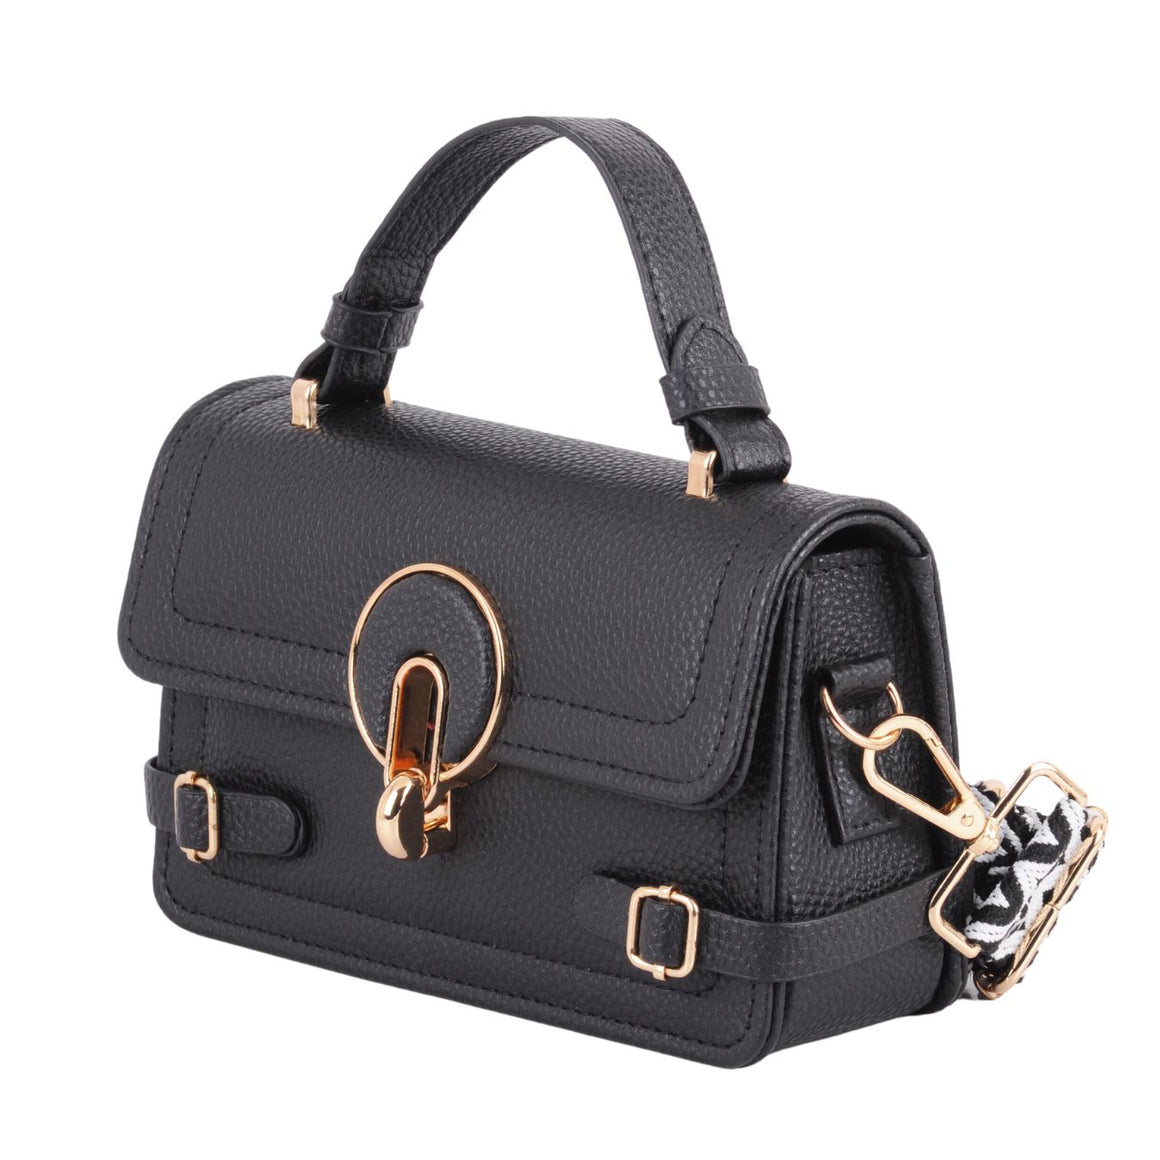 1541 - Modern Elegance: Top Handle with Rounded Accent Hardware and Matching Web Strap, plus PU Crossbody Strap